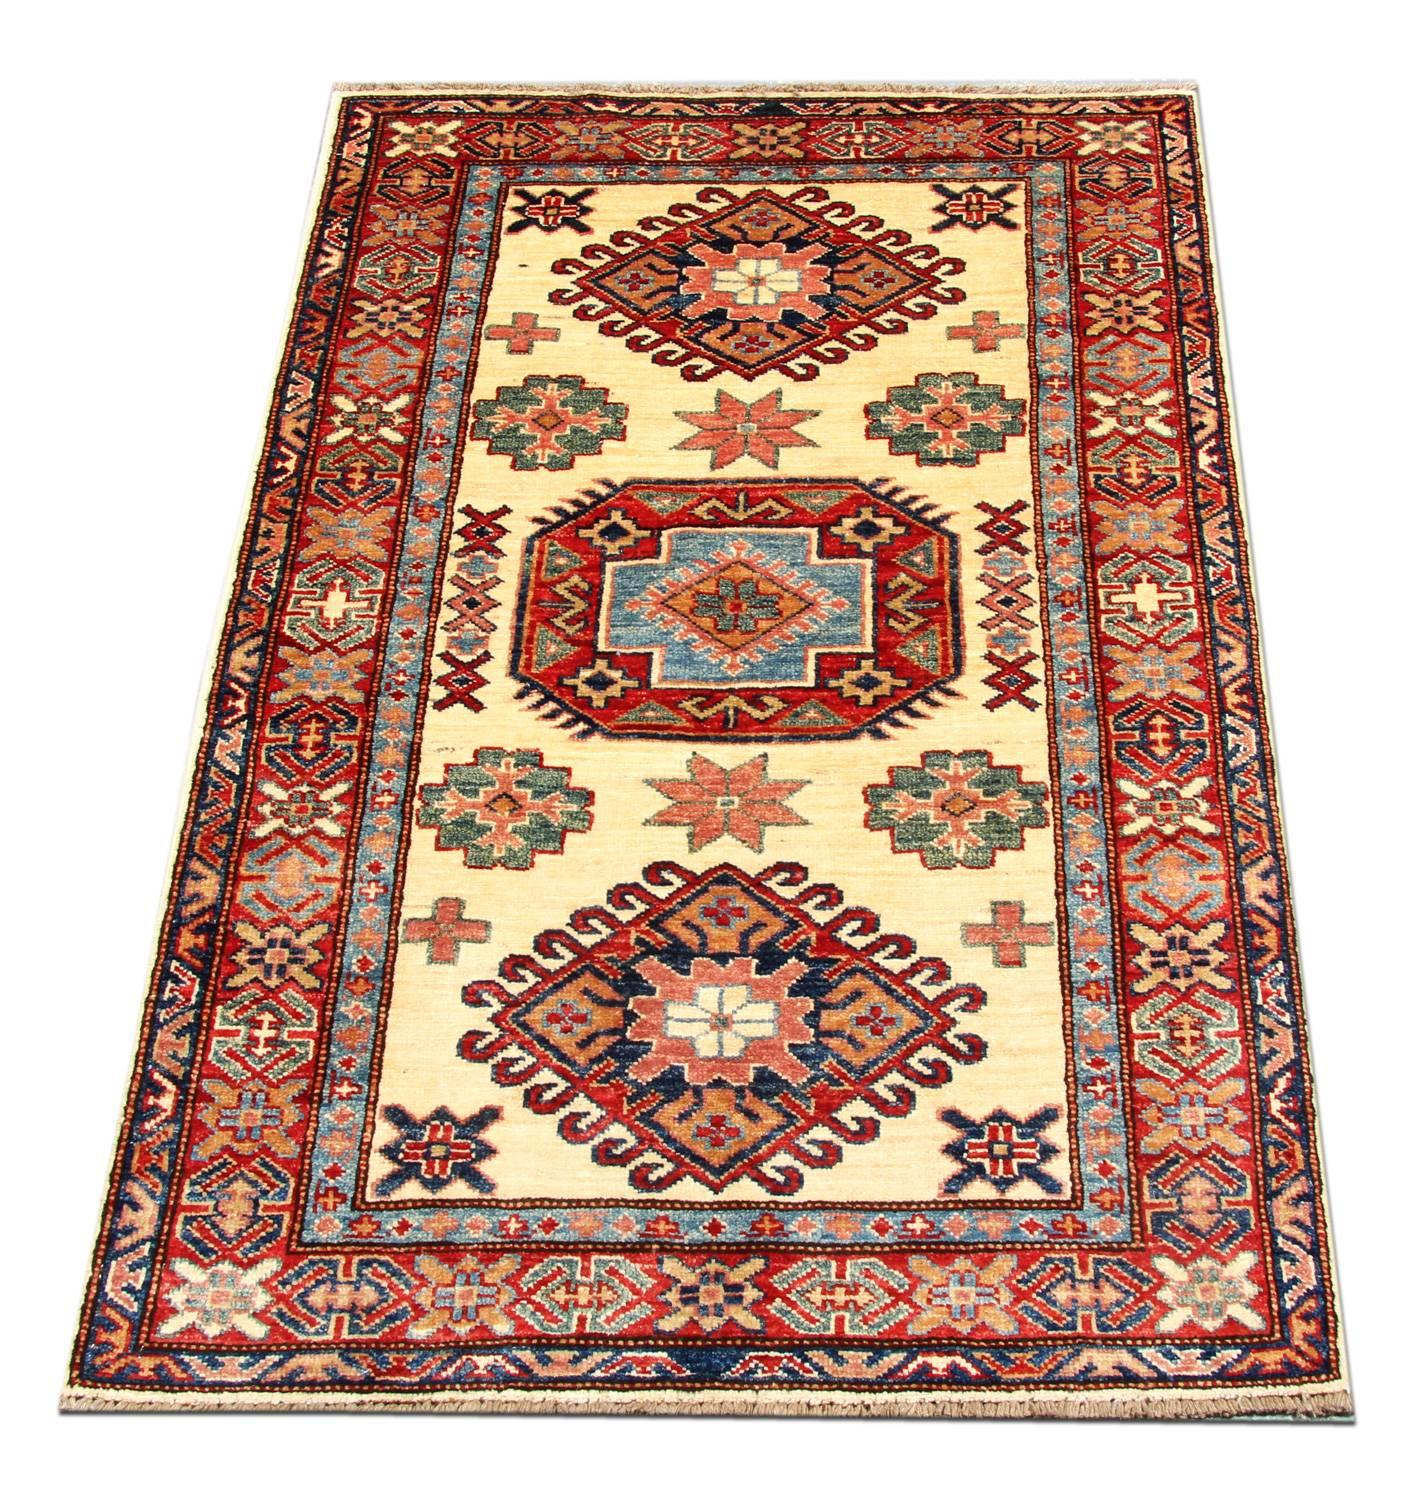 This traditional handwoven tribal rug with bold colors of cream, light blue and red featuring intricate geometric rug designs of stars, peacocks trees encompassing three medallions. This cream rug is handmade with wool and cotton. Afghan rugs would